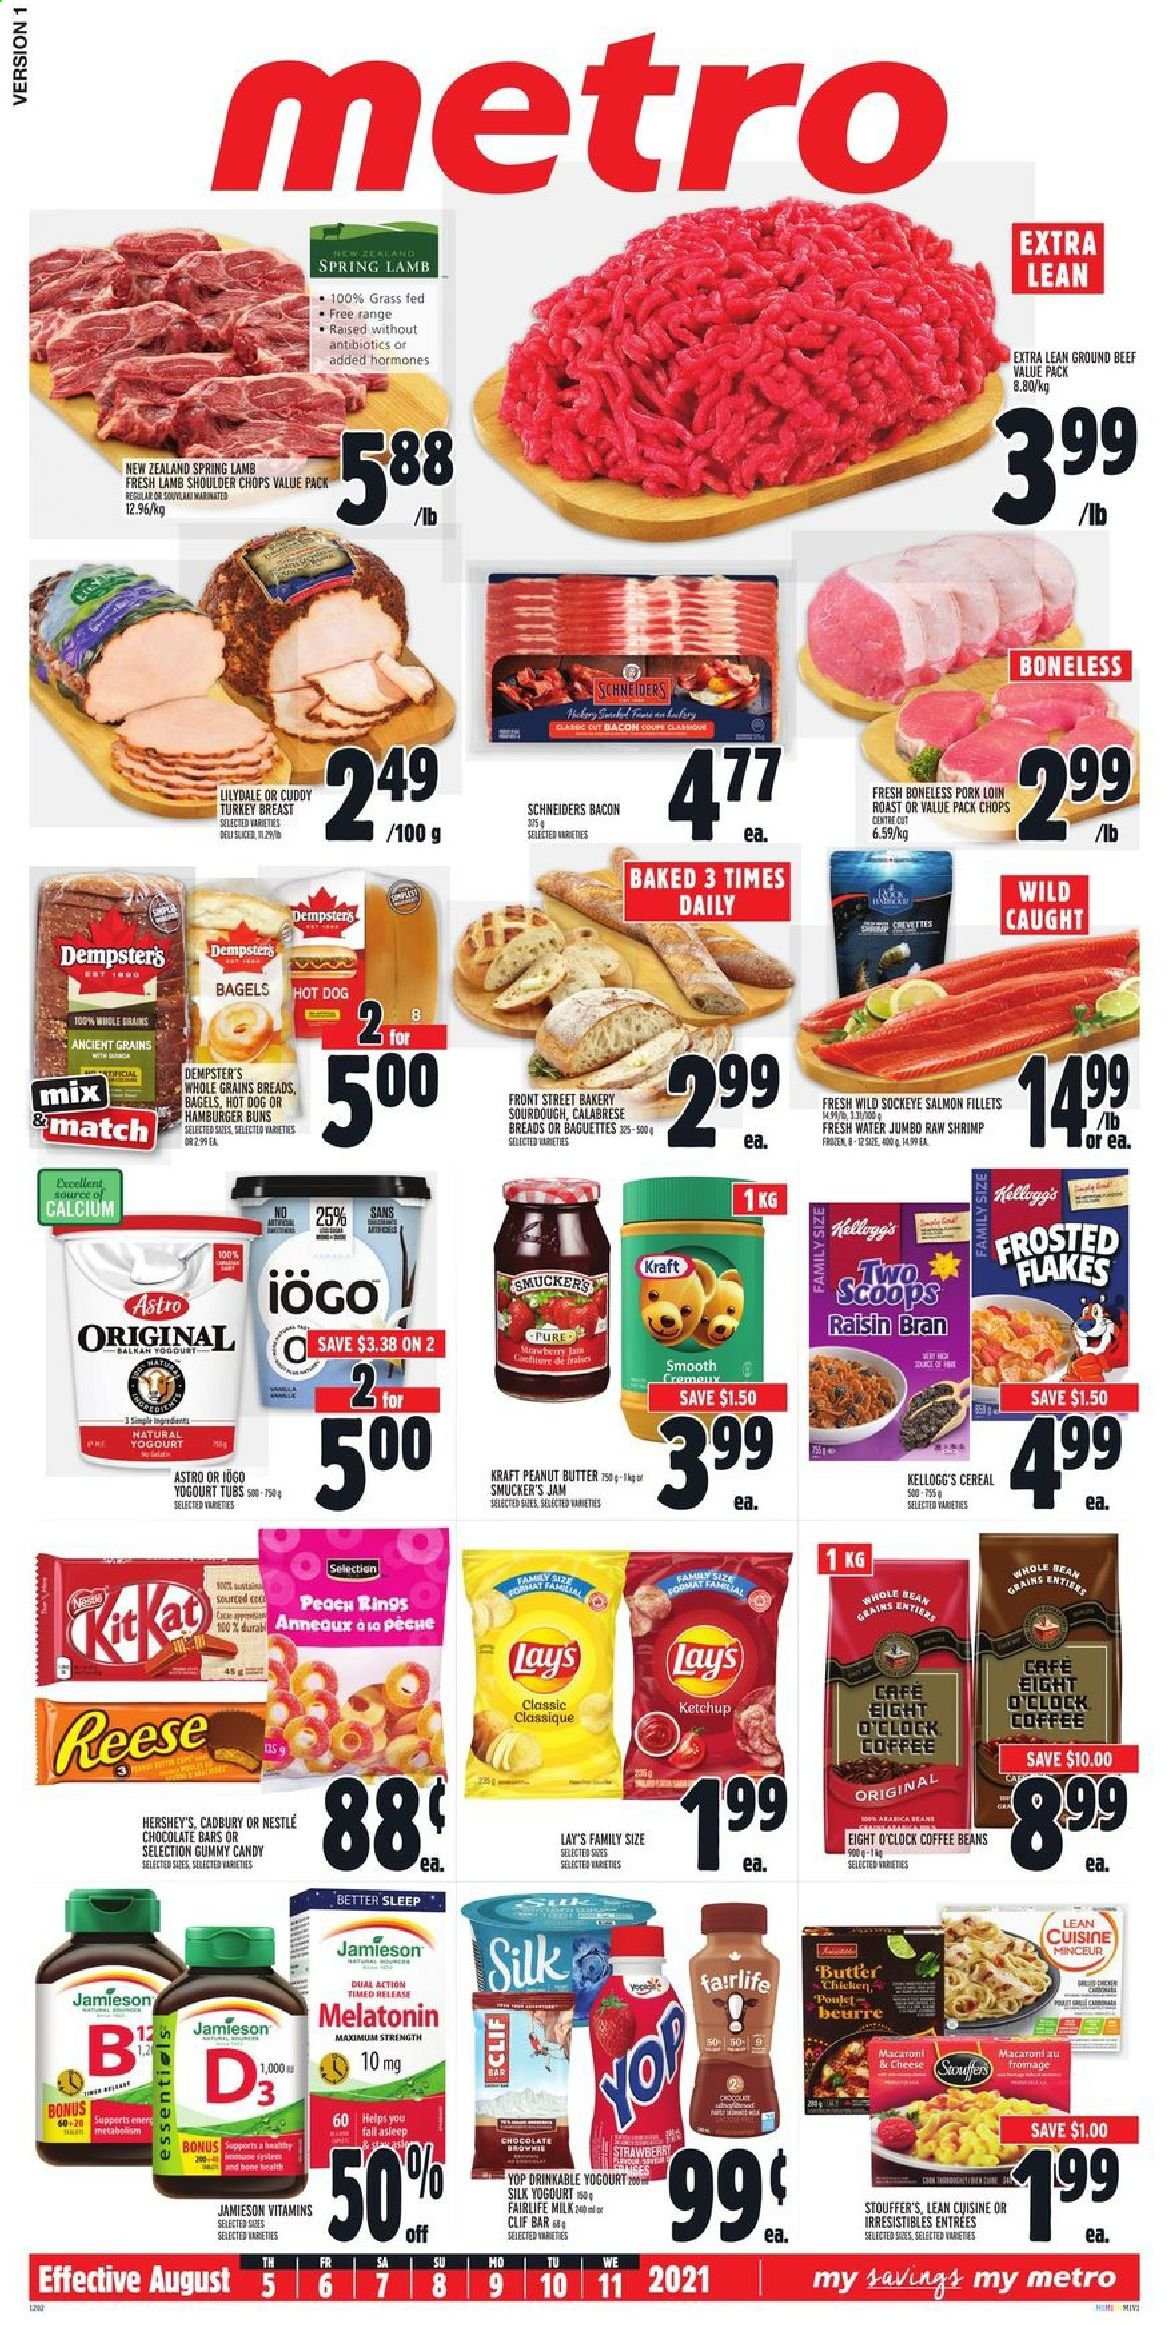 thumbnail - Metro Flyer - August 05, 2021 - August 11, 2021 - Sales products - bagels, buns, burger buns, salmon, salmon fillet, shrimps, macaroni & cheese, hot dog, Lean Cuisine, Kraft®, bacon, milk, Silk, Hershey's, Stouffer's, Kellogg's, Cadbury, chocolate bar, Lay’s, cereals, Frosted Flakes, Raisin Bran, fruit jam, peanut butter, coffee beans, Eight O'Clock, turkey breast, turkey, beef meat, ground beef, pork loin, pork meat, lamb meat, lamb shoulder, vitamin D3, Nestlé. Page 1.